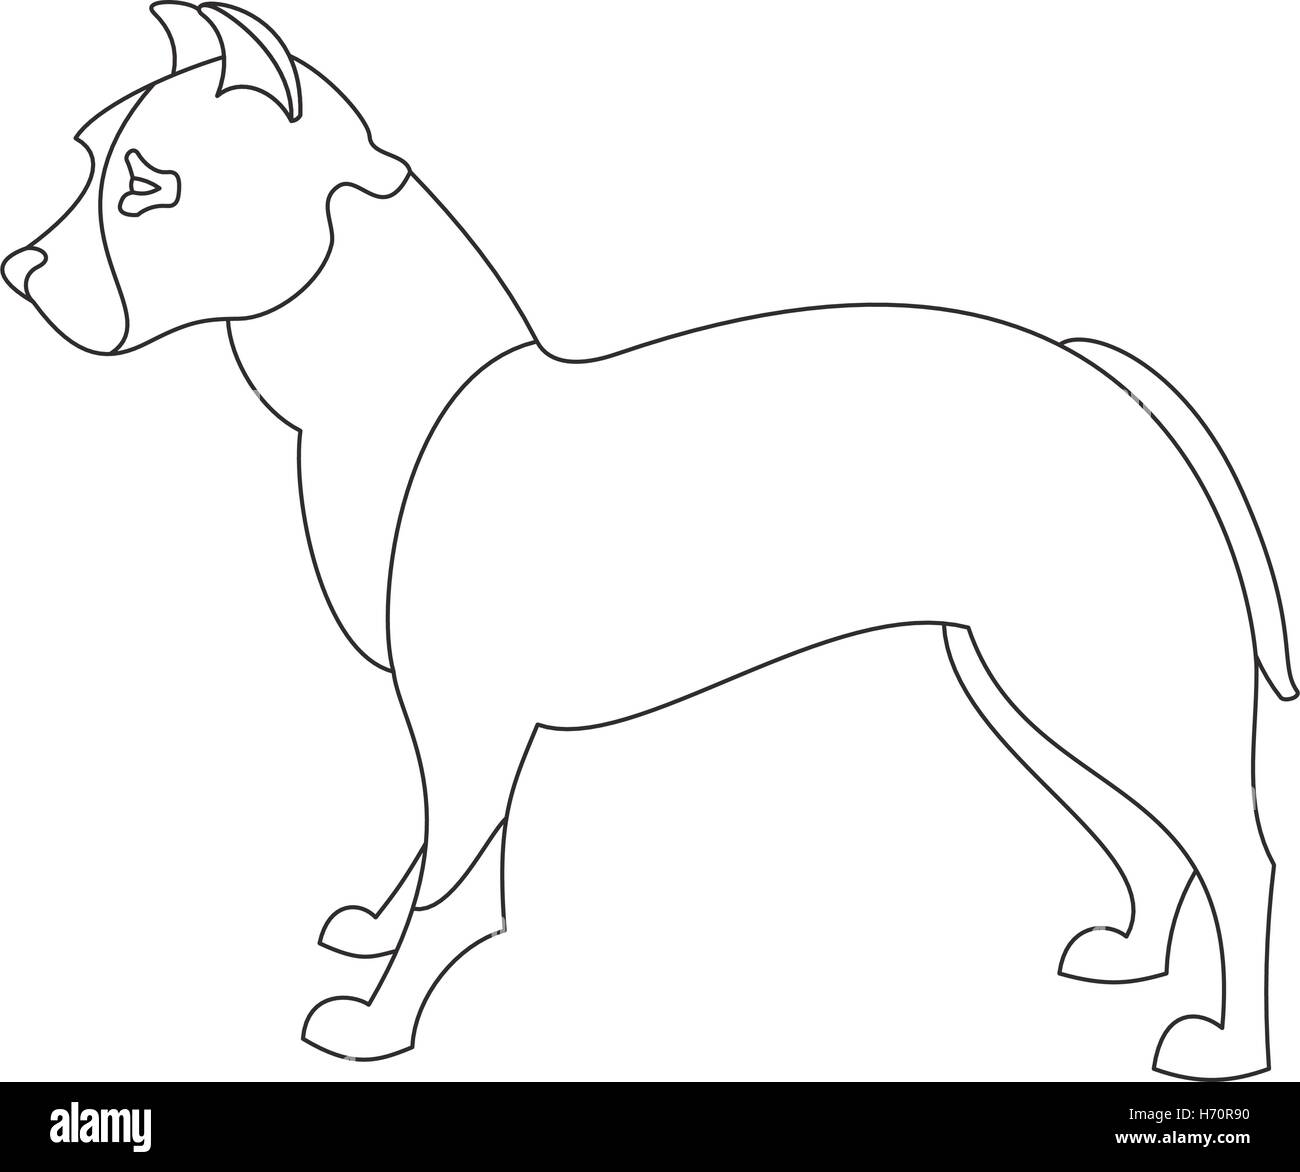 American pitt bull terrier. Obedience doggy in linear style. Vector illustration Stock Vector